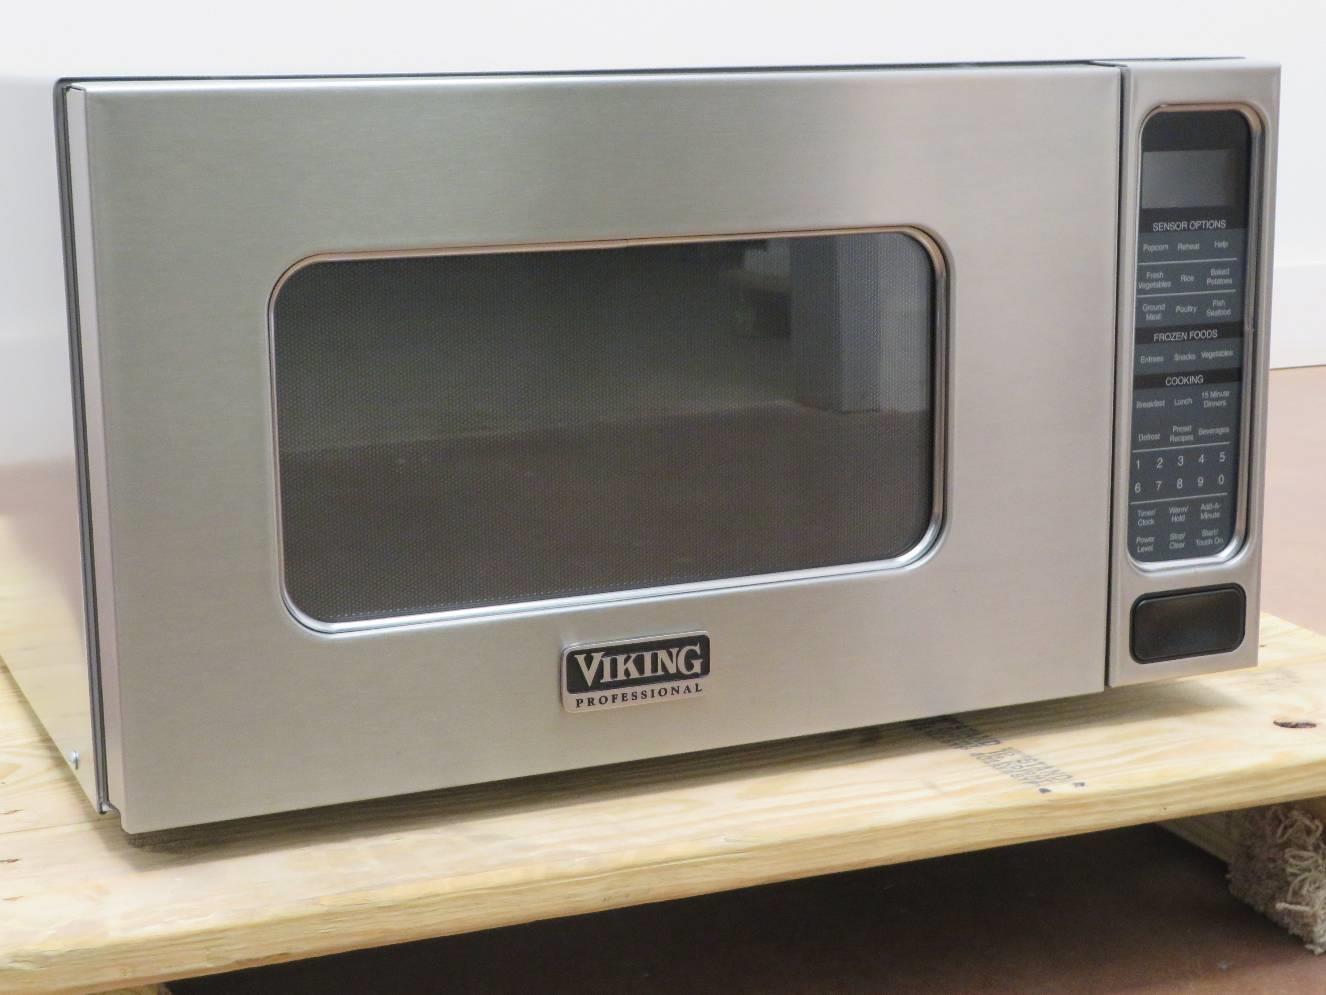 Viking 5 Series 1.5 cu. ft. Built-In Stainless Steel Microwave Oven